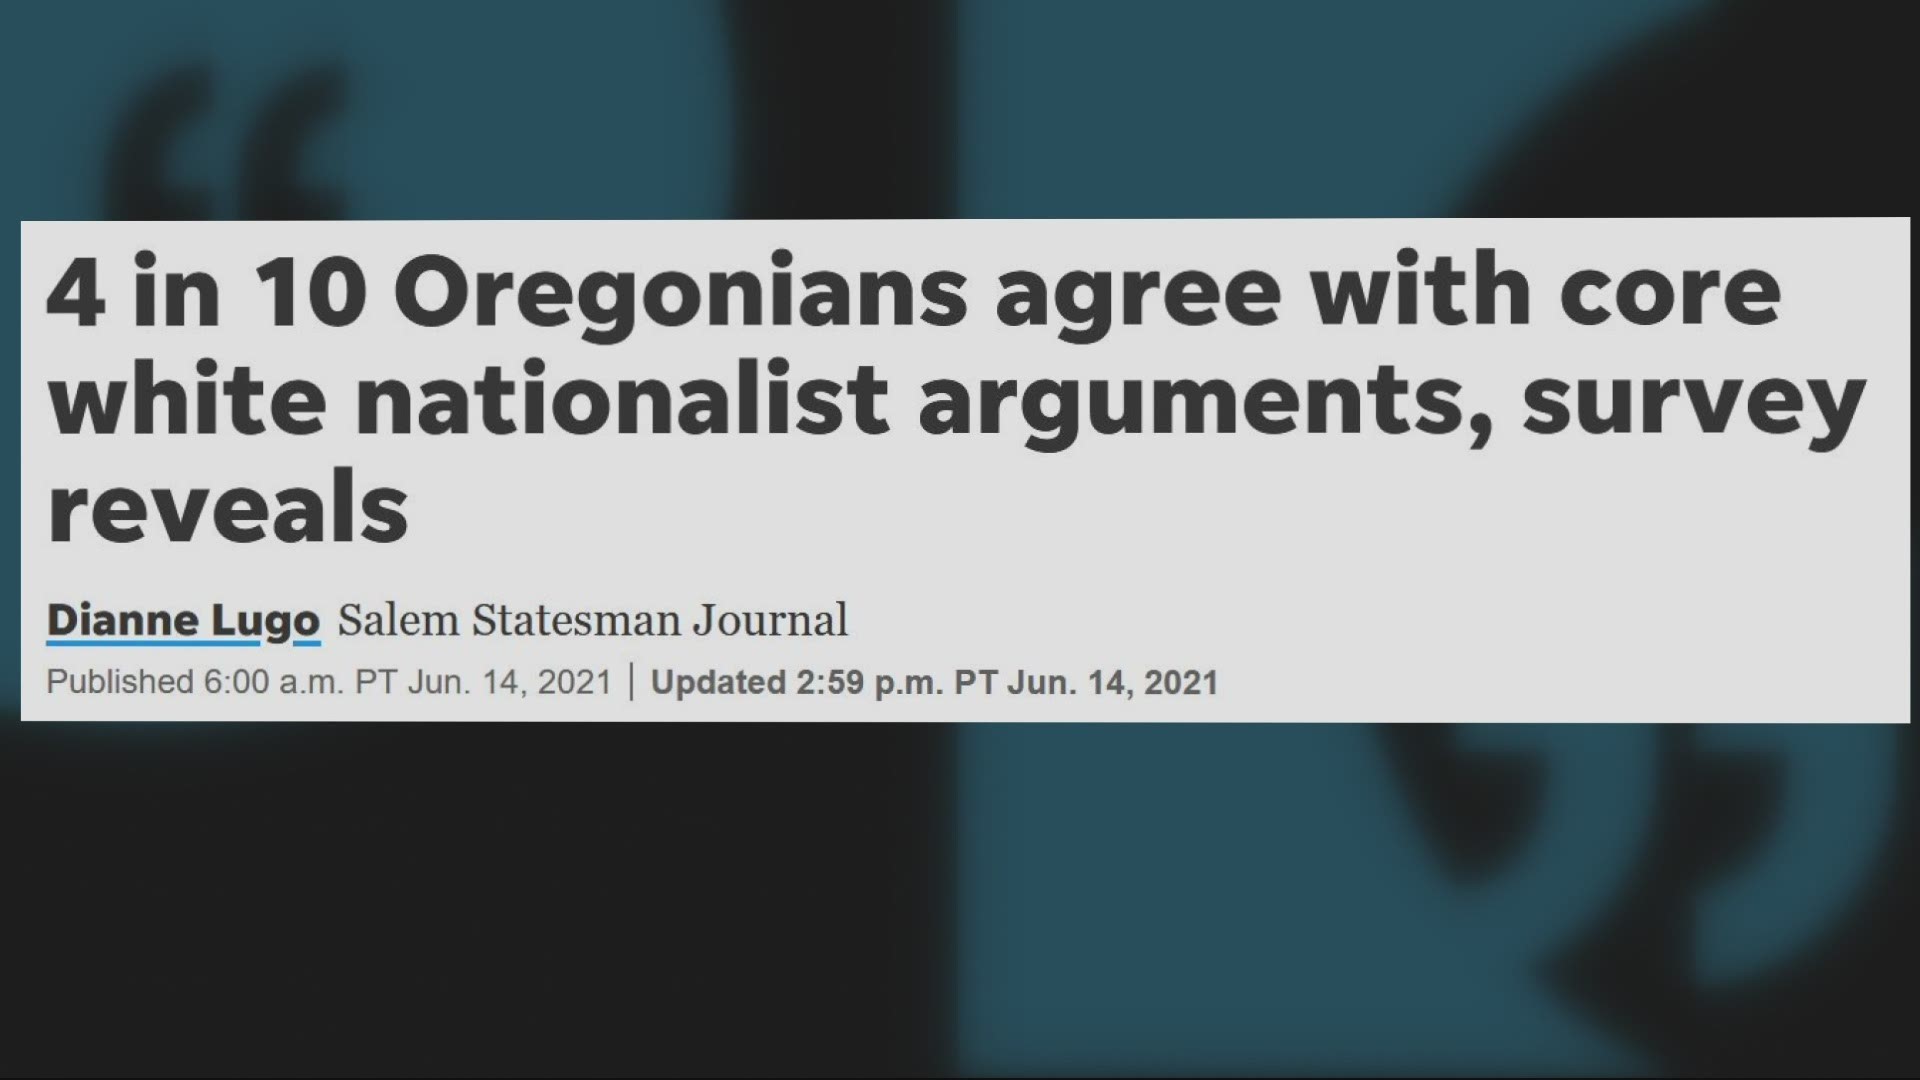 A survey found that 40% of Oregonians, up from 31% in 2018, believe that America must “protest and preserve its white European heritage.”